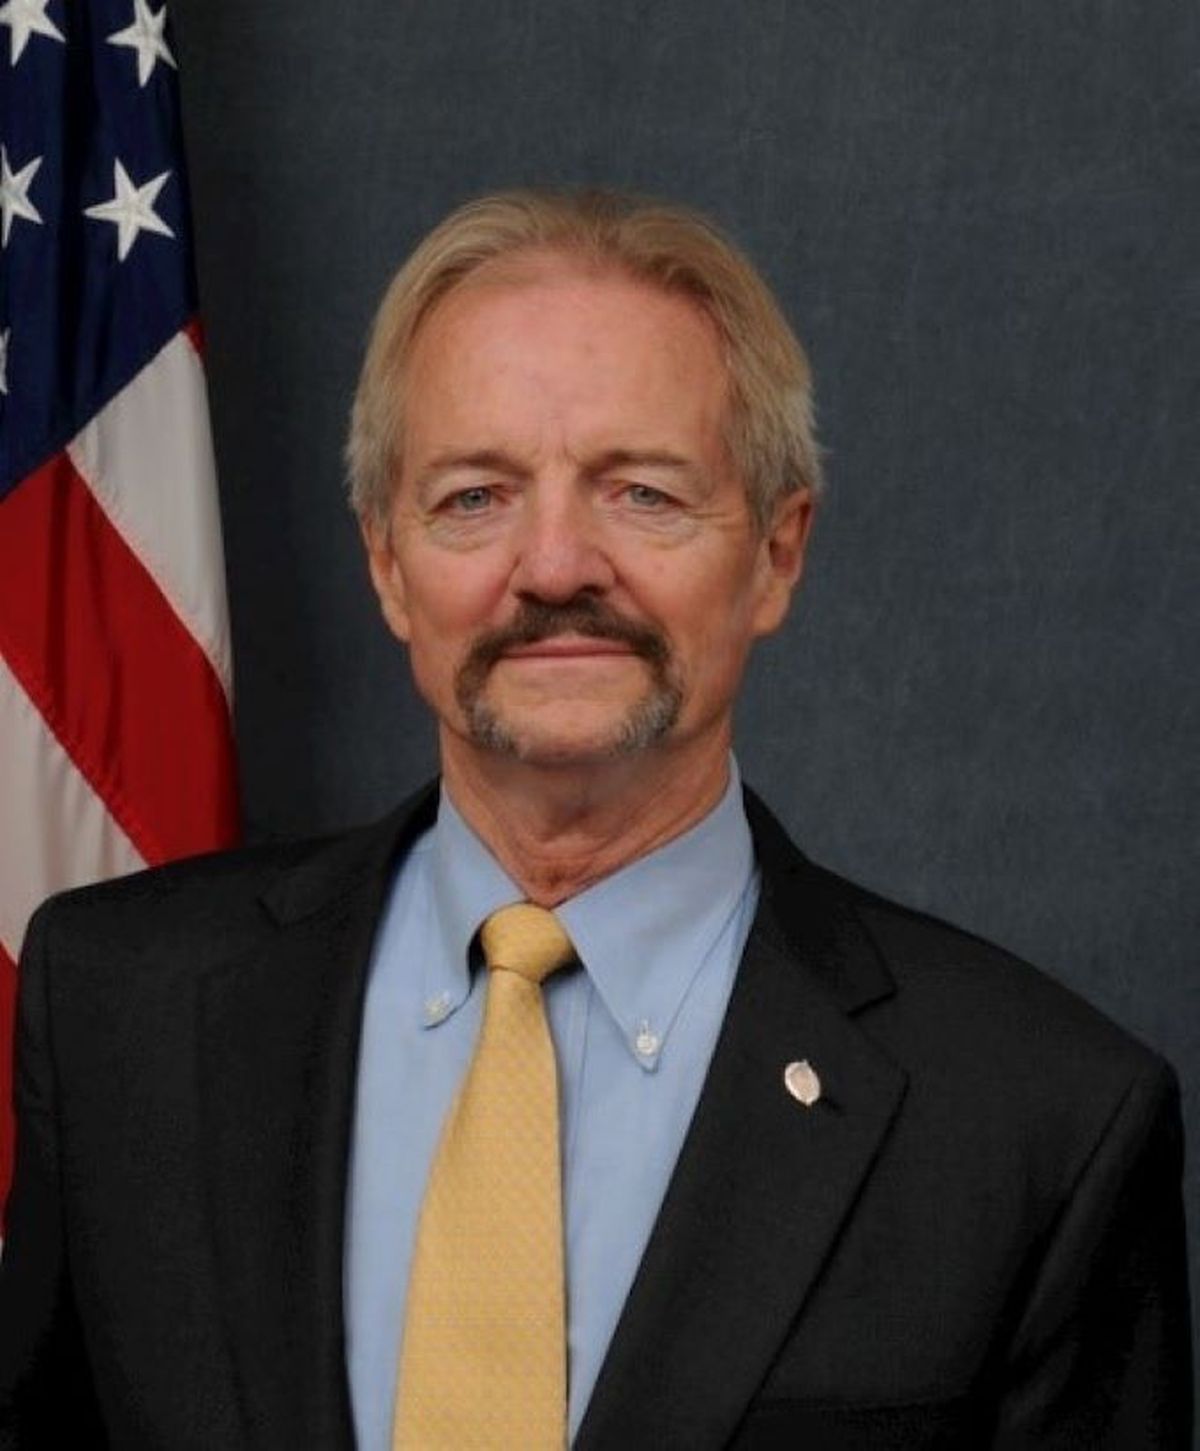 President Donald Trump has nominated William Perry Pendley to lead the Bureau of Land Management. Pendley currently serves in that role on an interim basis.  (U.S. Department of Interior)